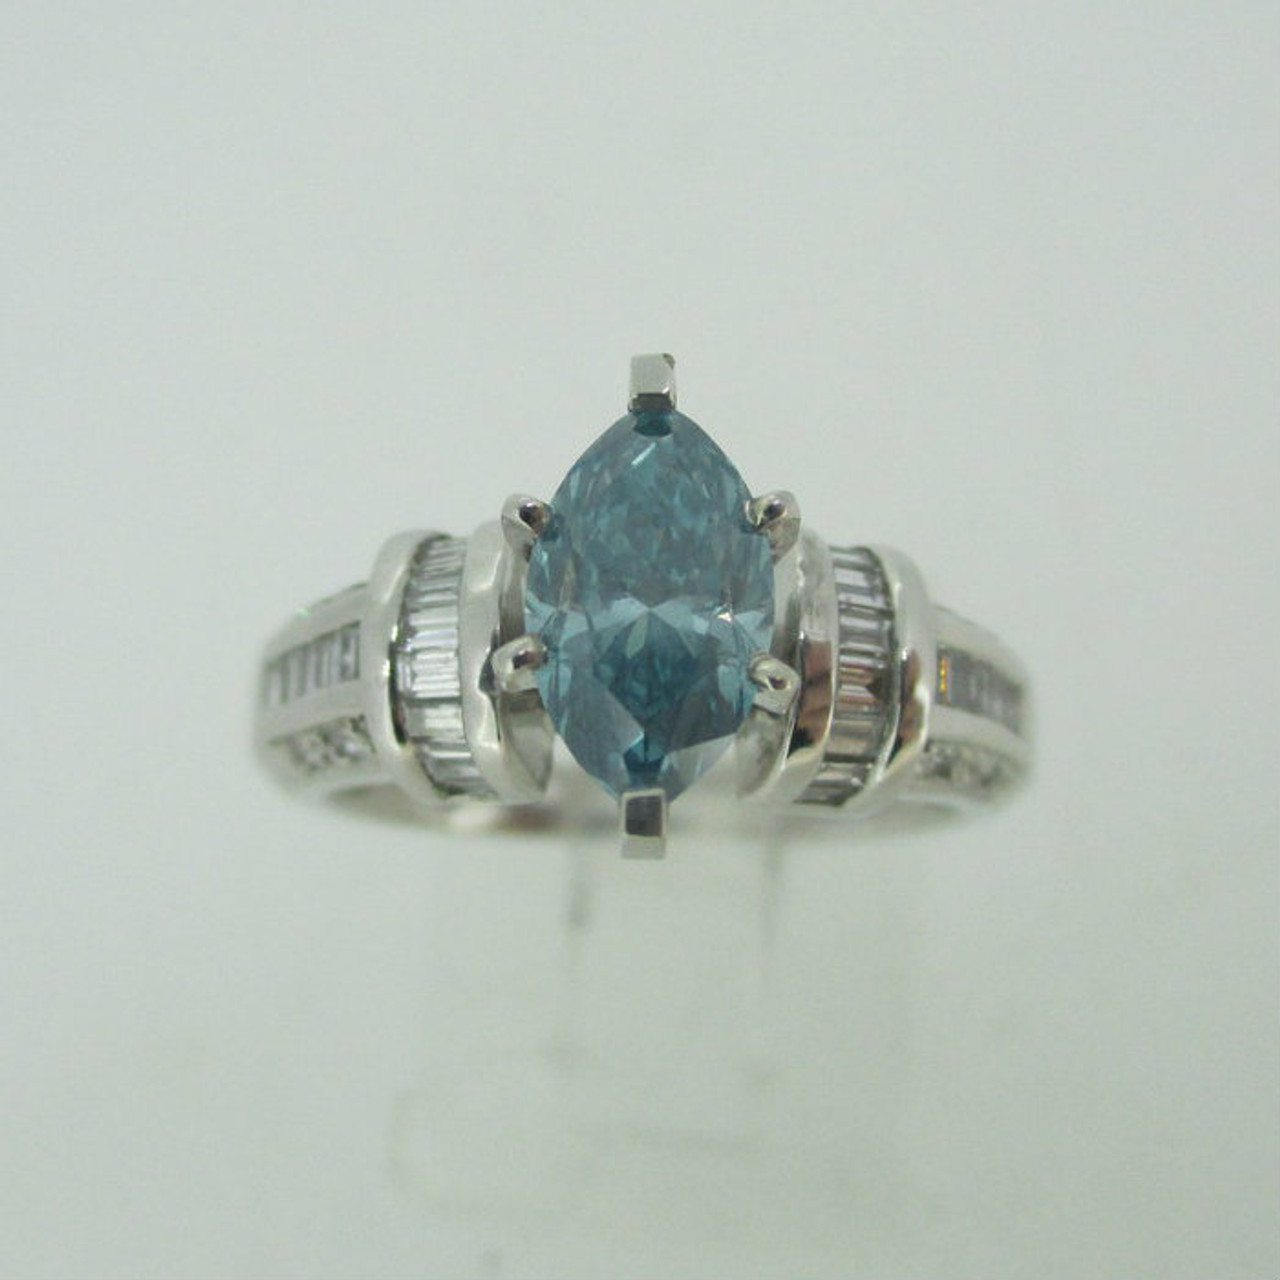 14k White Gold 1.06ct Marquise Cut Blue Diamond Ring with Diamond Accents  Size 6 1/4